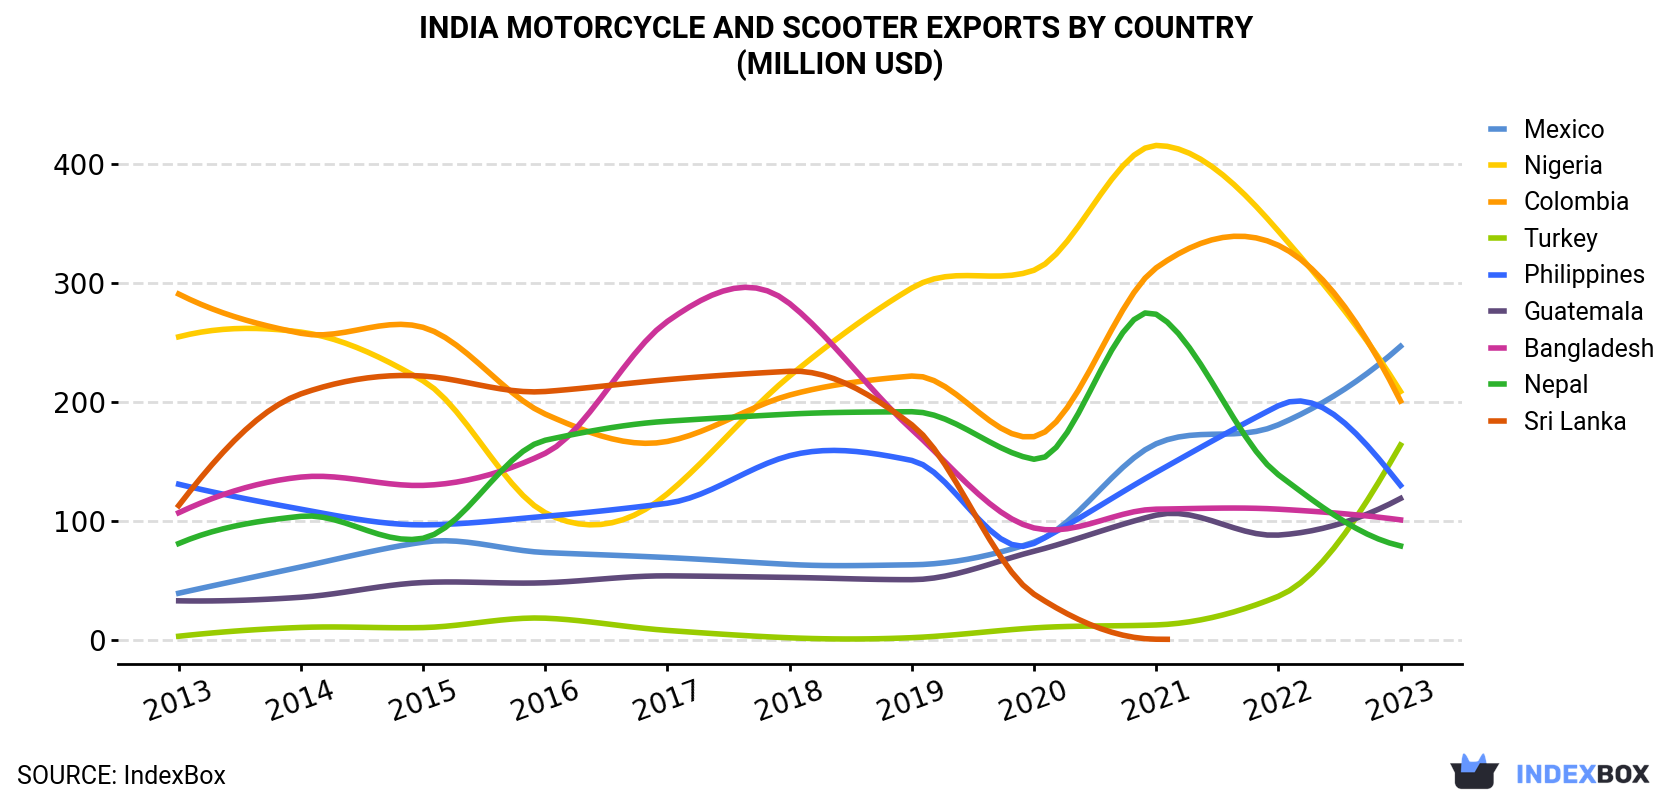 India Motorcycle and Scooter Exports By Country (Million USD)